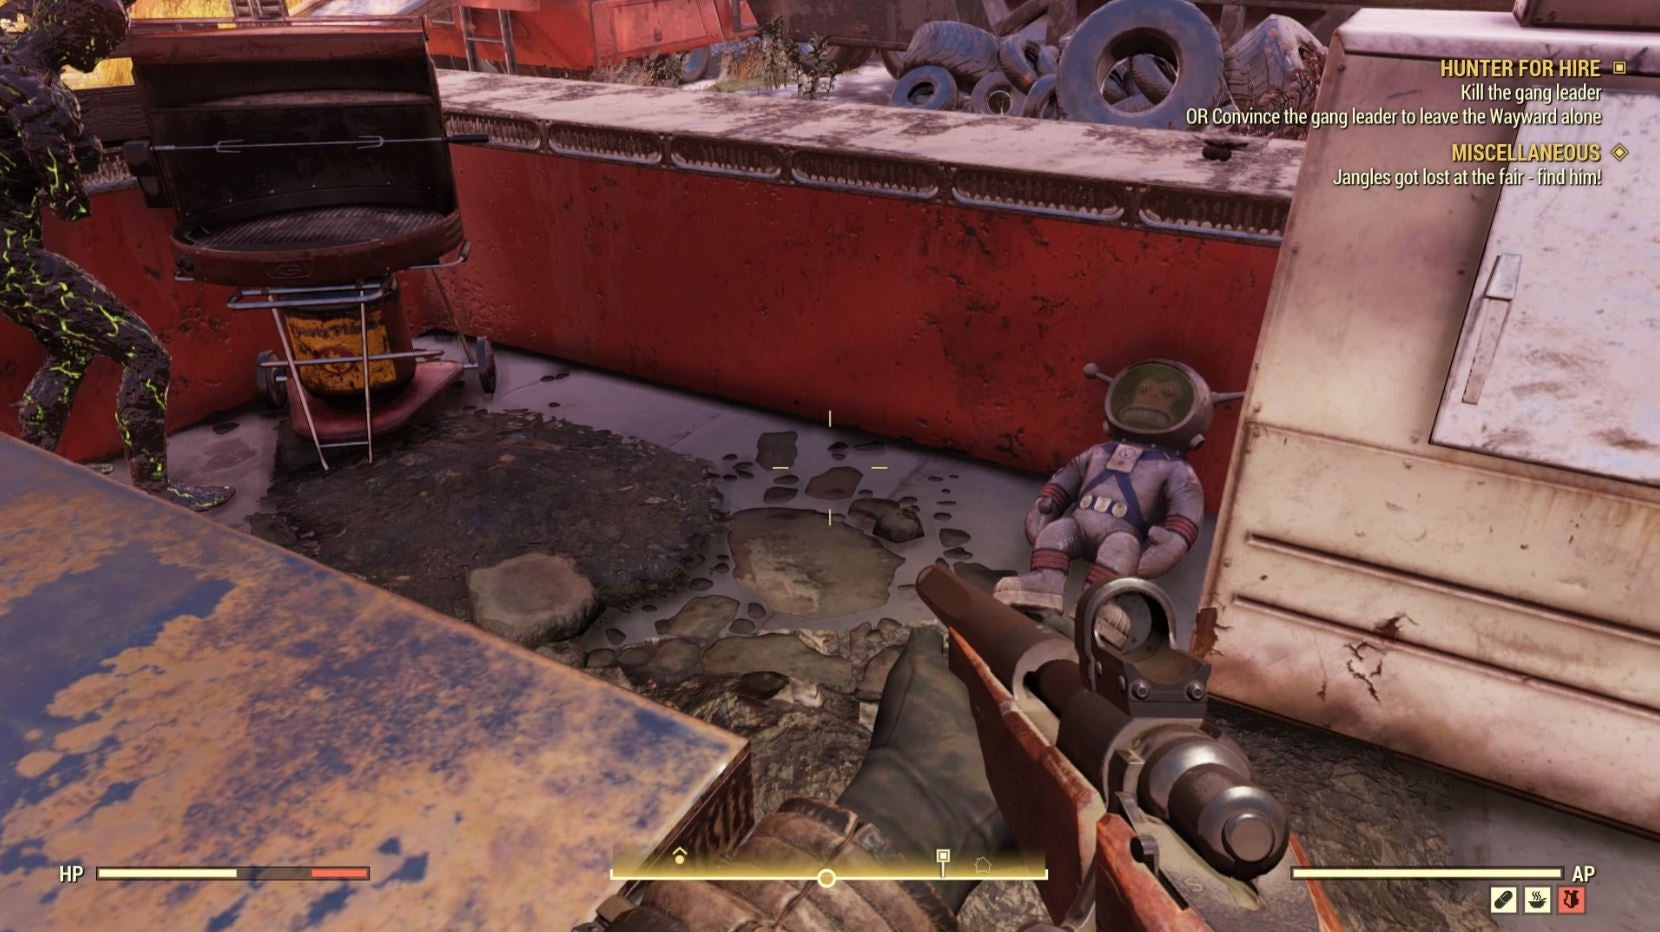 Image for Fallout 76: Where to find the Jangles lost at the fair